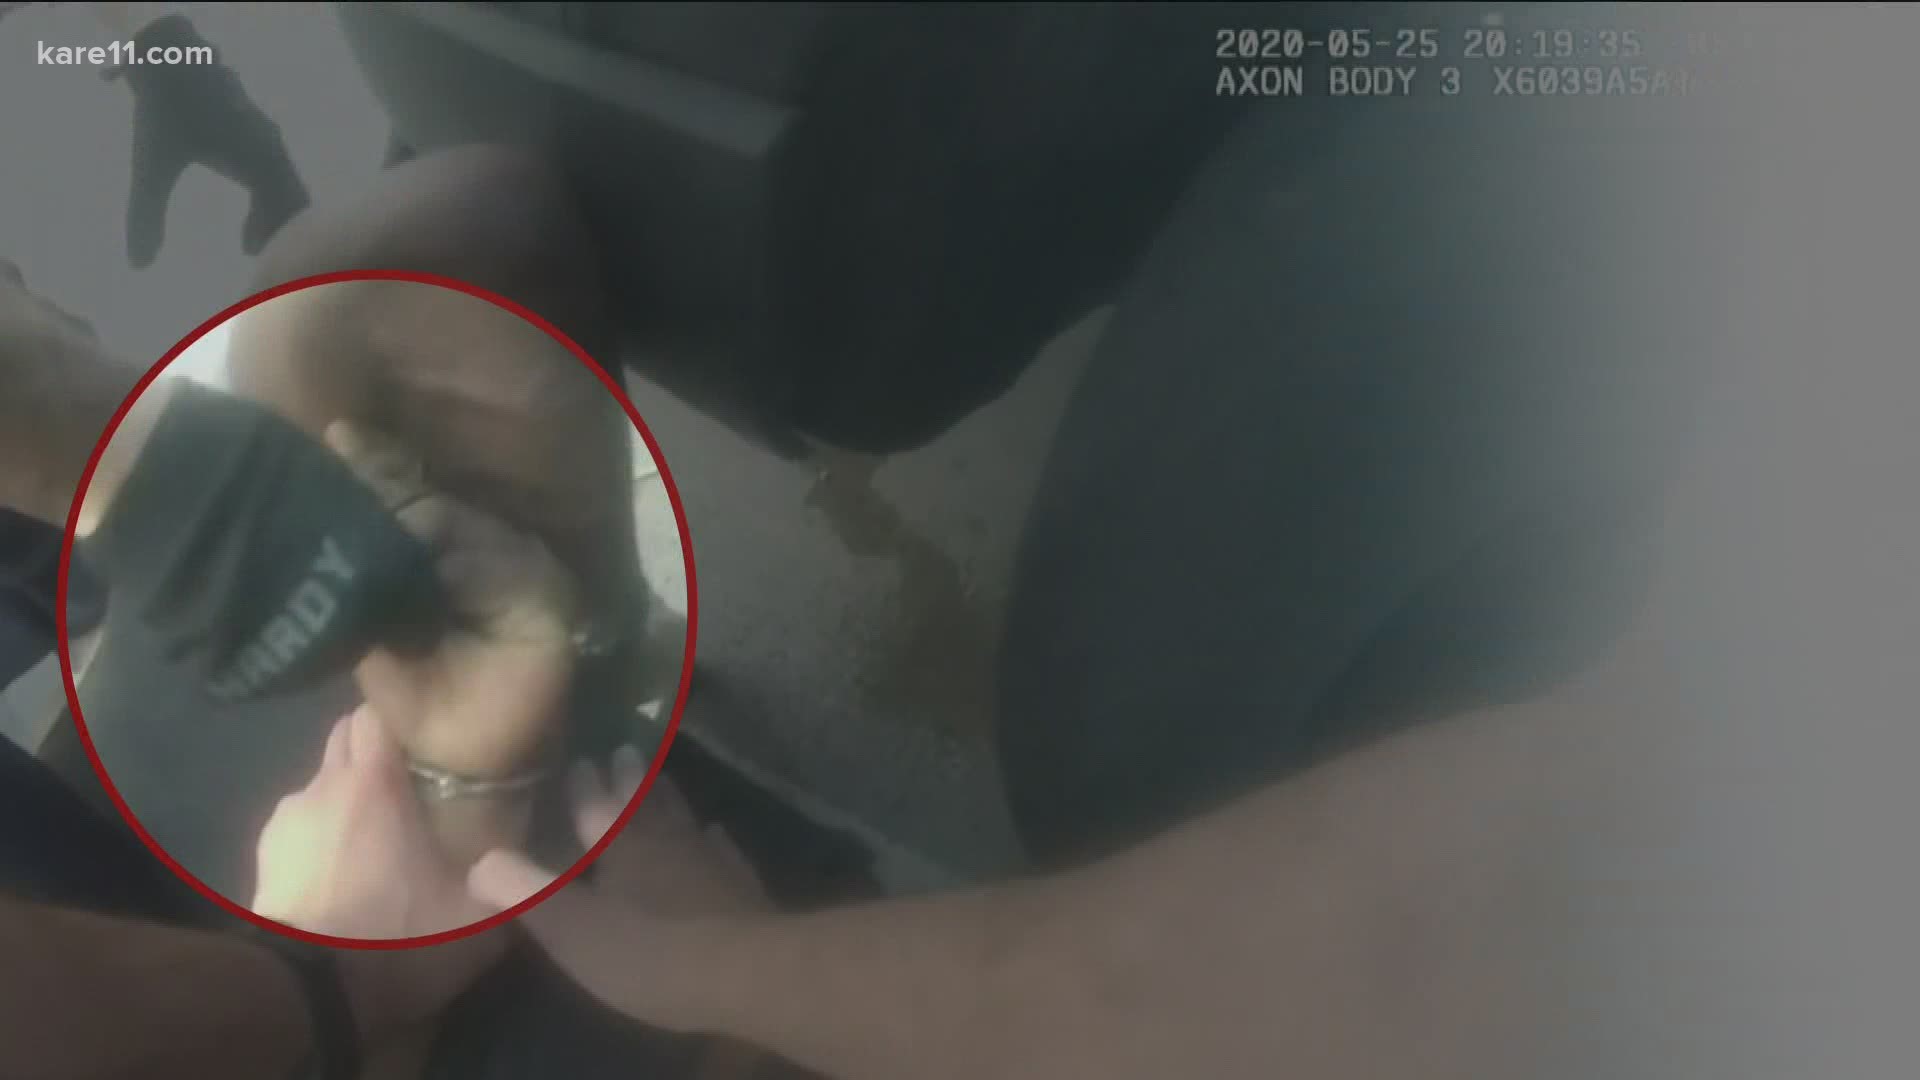 ‘Torture’ or authorized ‘pain compliance’ tactic? Bodycam video shows officer Derek Chauvin squeezing George Floyd’s fingers.